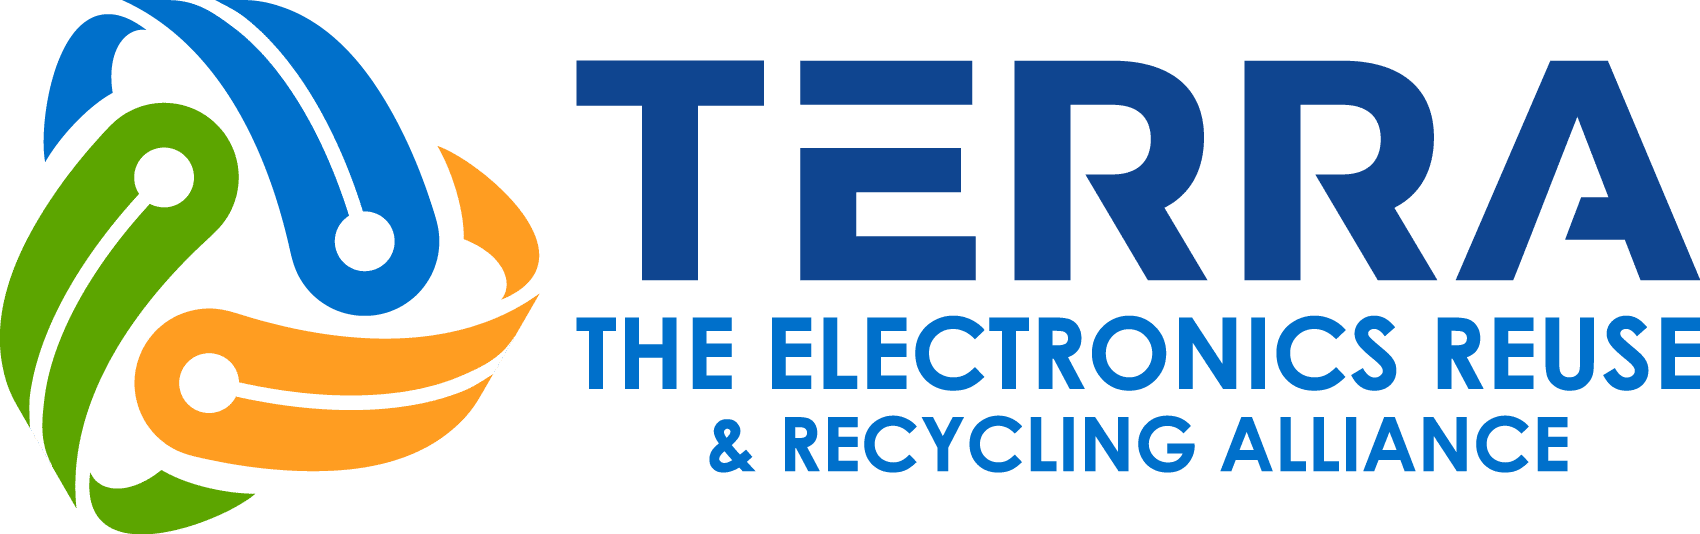 TERRA: The Electronics Reuse & Recycling Alliance